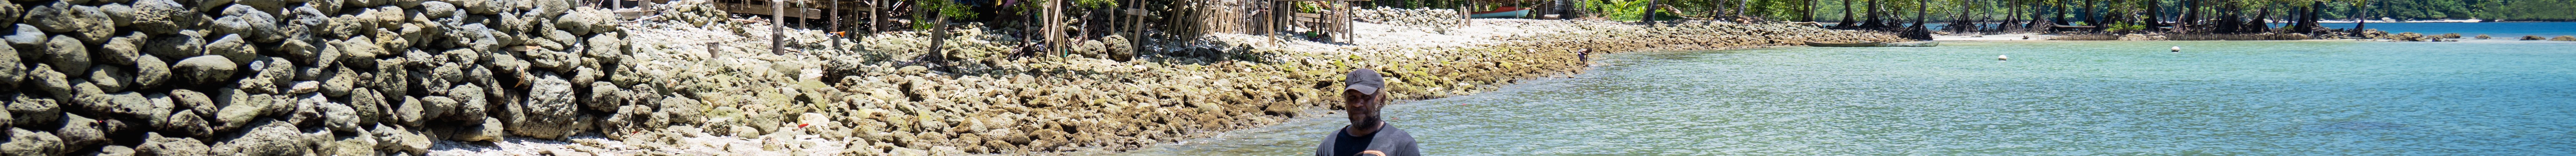 Martin Hau’ato stands where there used to be dry land and houses of Muki Community in the Solomon Islands (Ivan Utahenua-Oxfam)